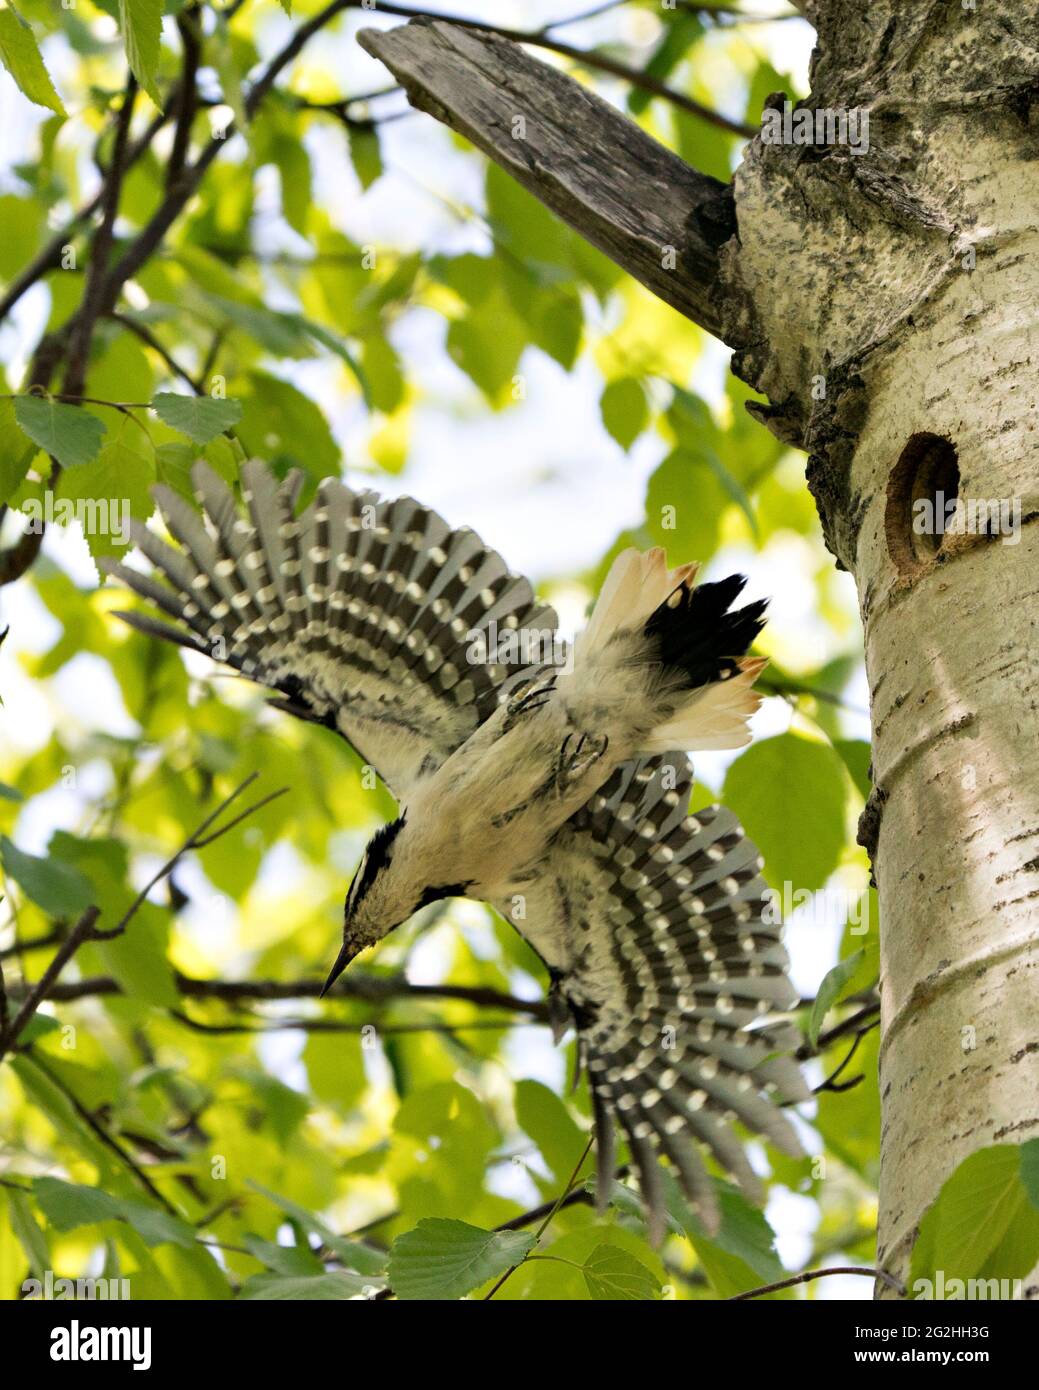 Woodpecker flying out of its nest house with spread wings with blur background in its environment and habitat. Woodpecker Hairy Image. Picture. Stock Photo